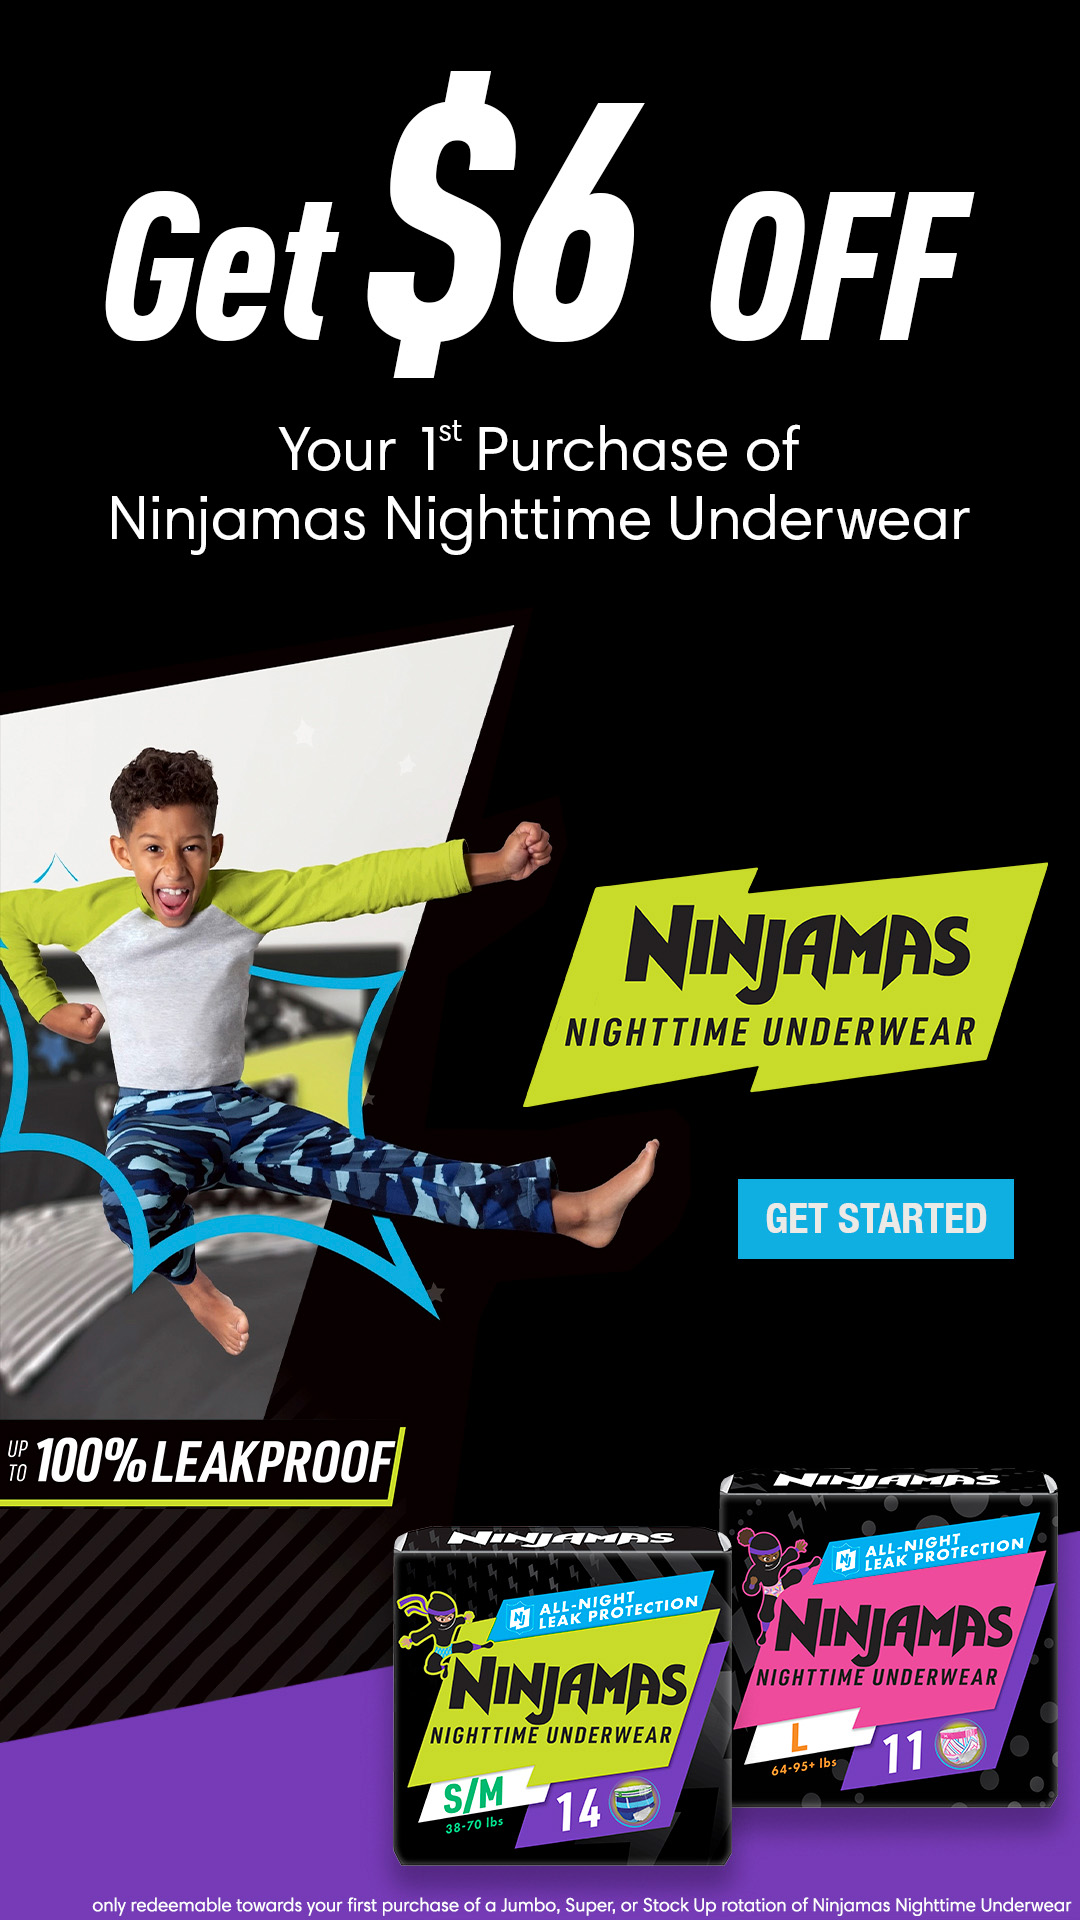 Get $6 off your first purchase of Ninjamas nighttime underwear.